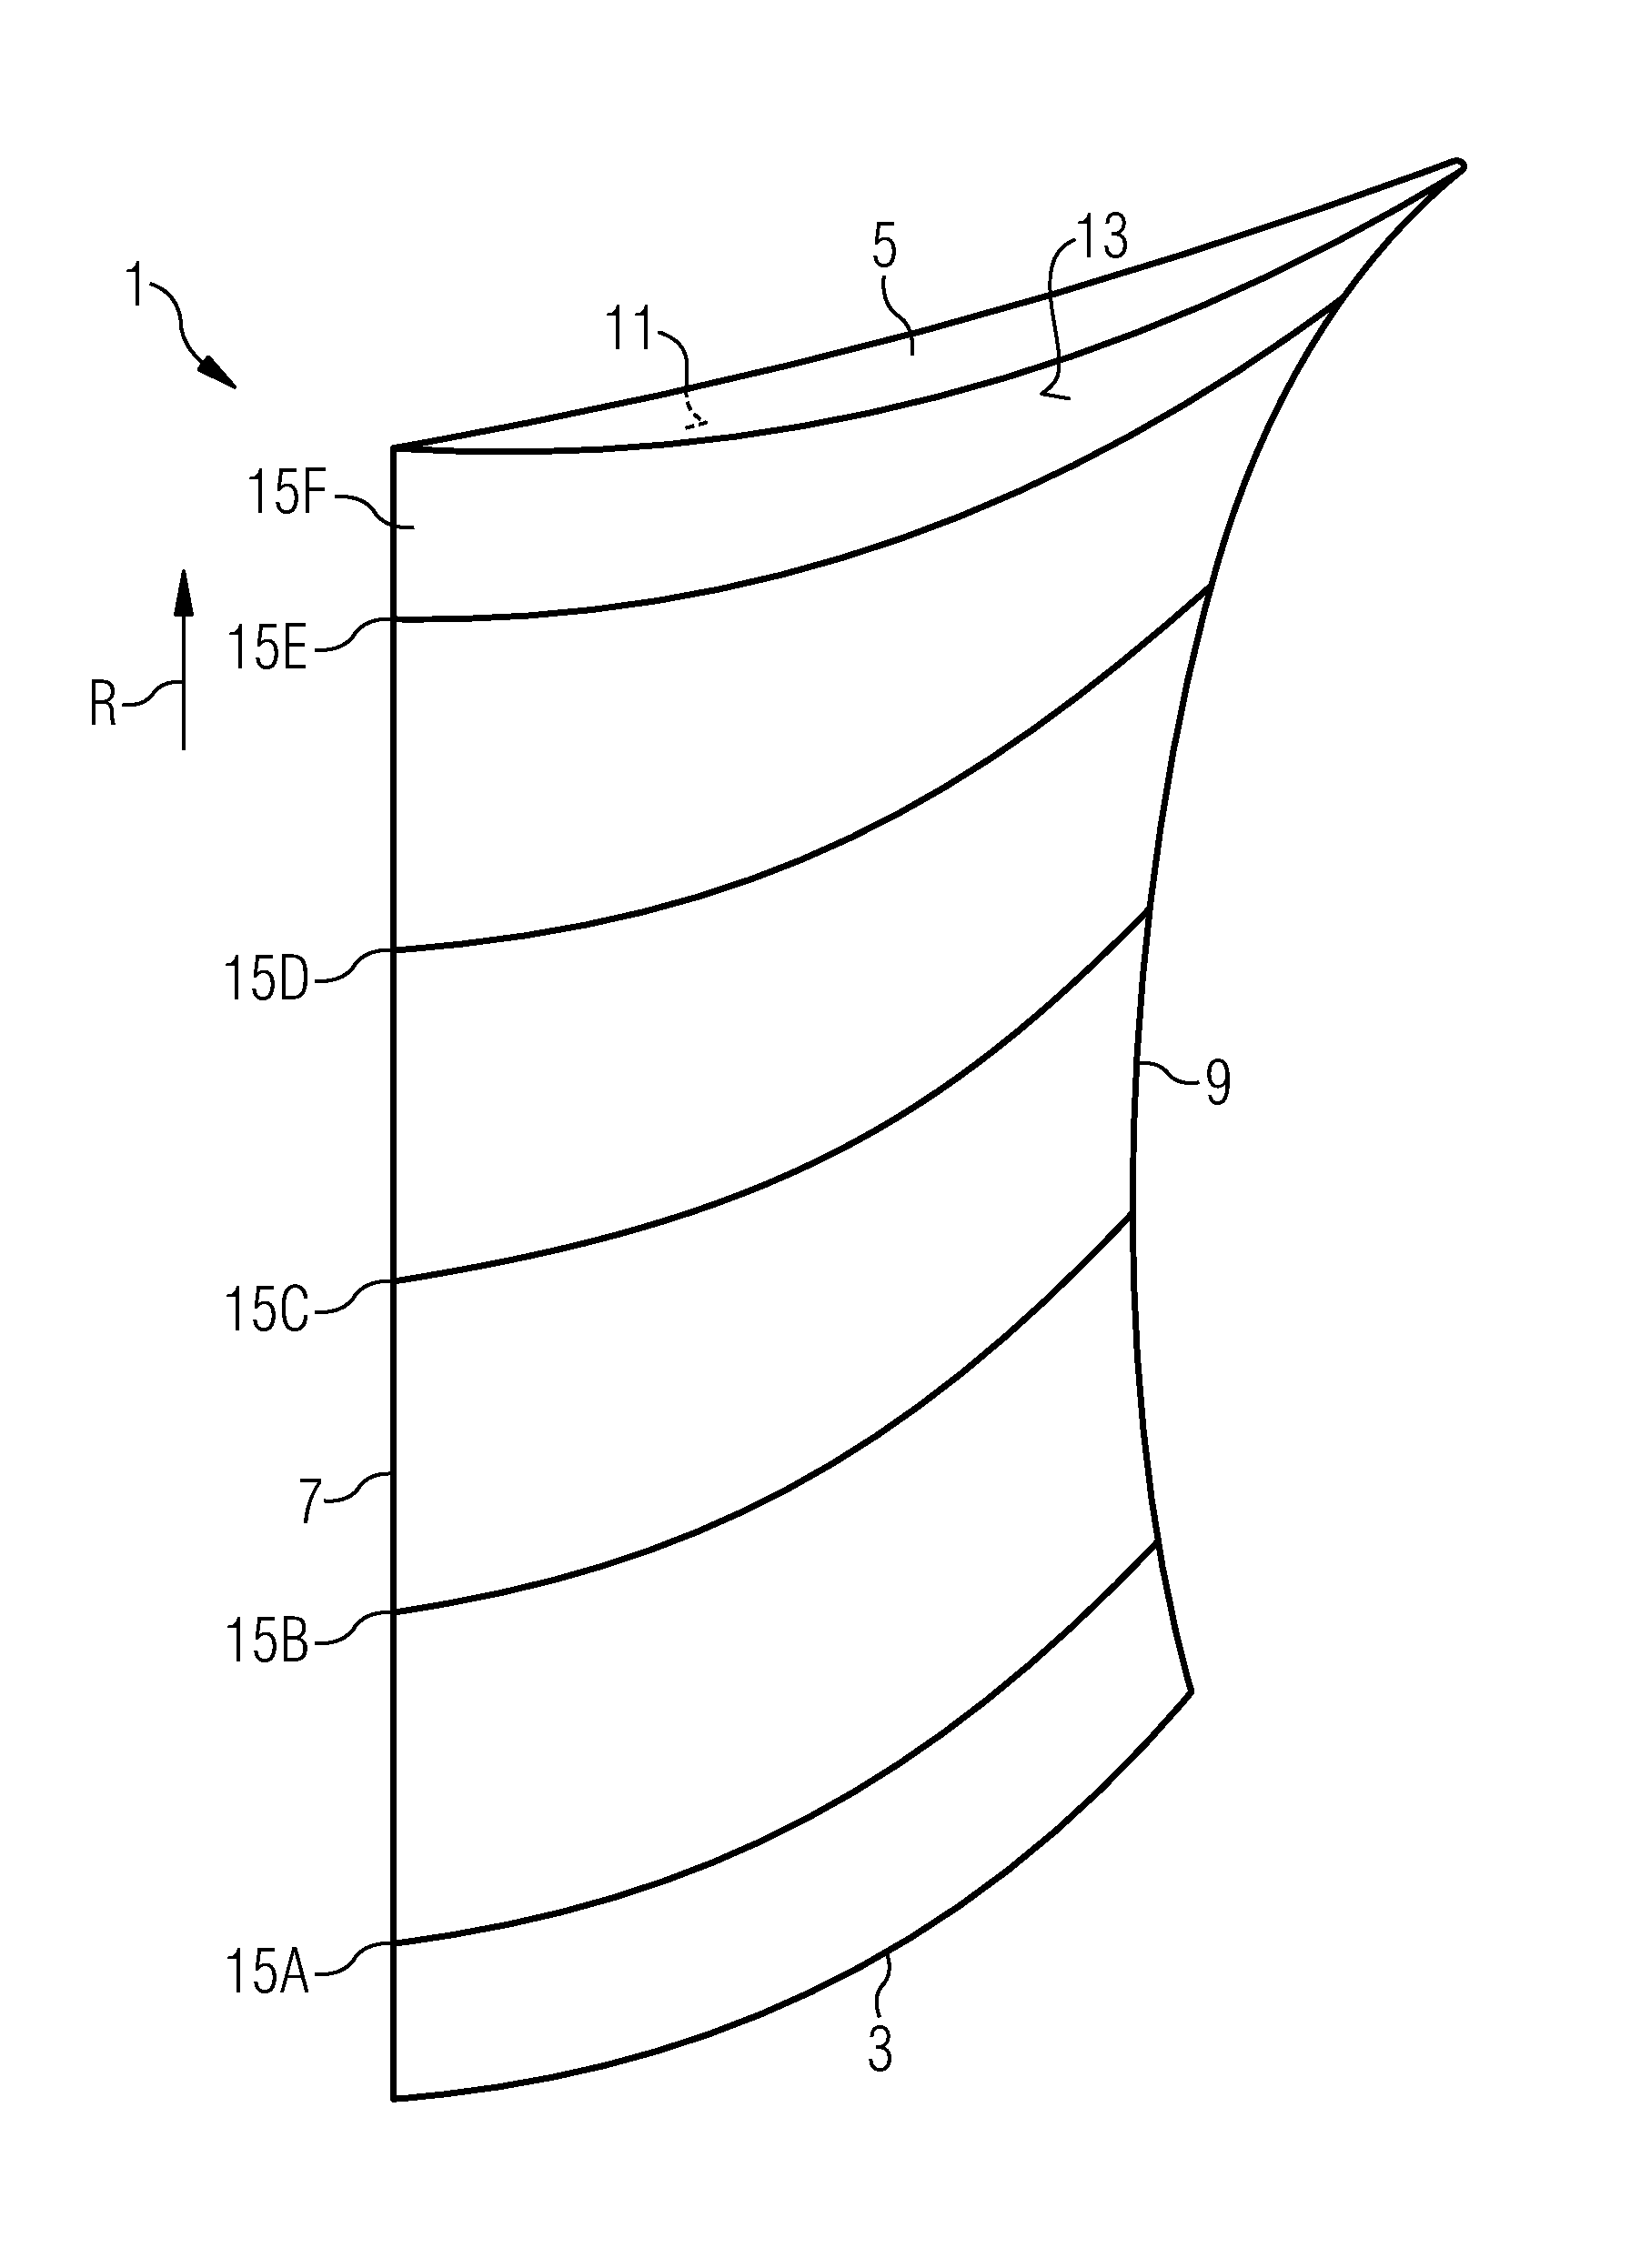 Vane or blade for an axial flow compressor